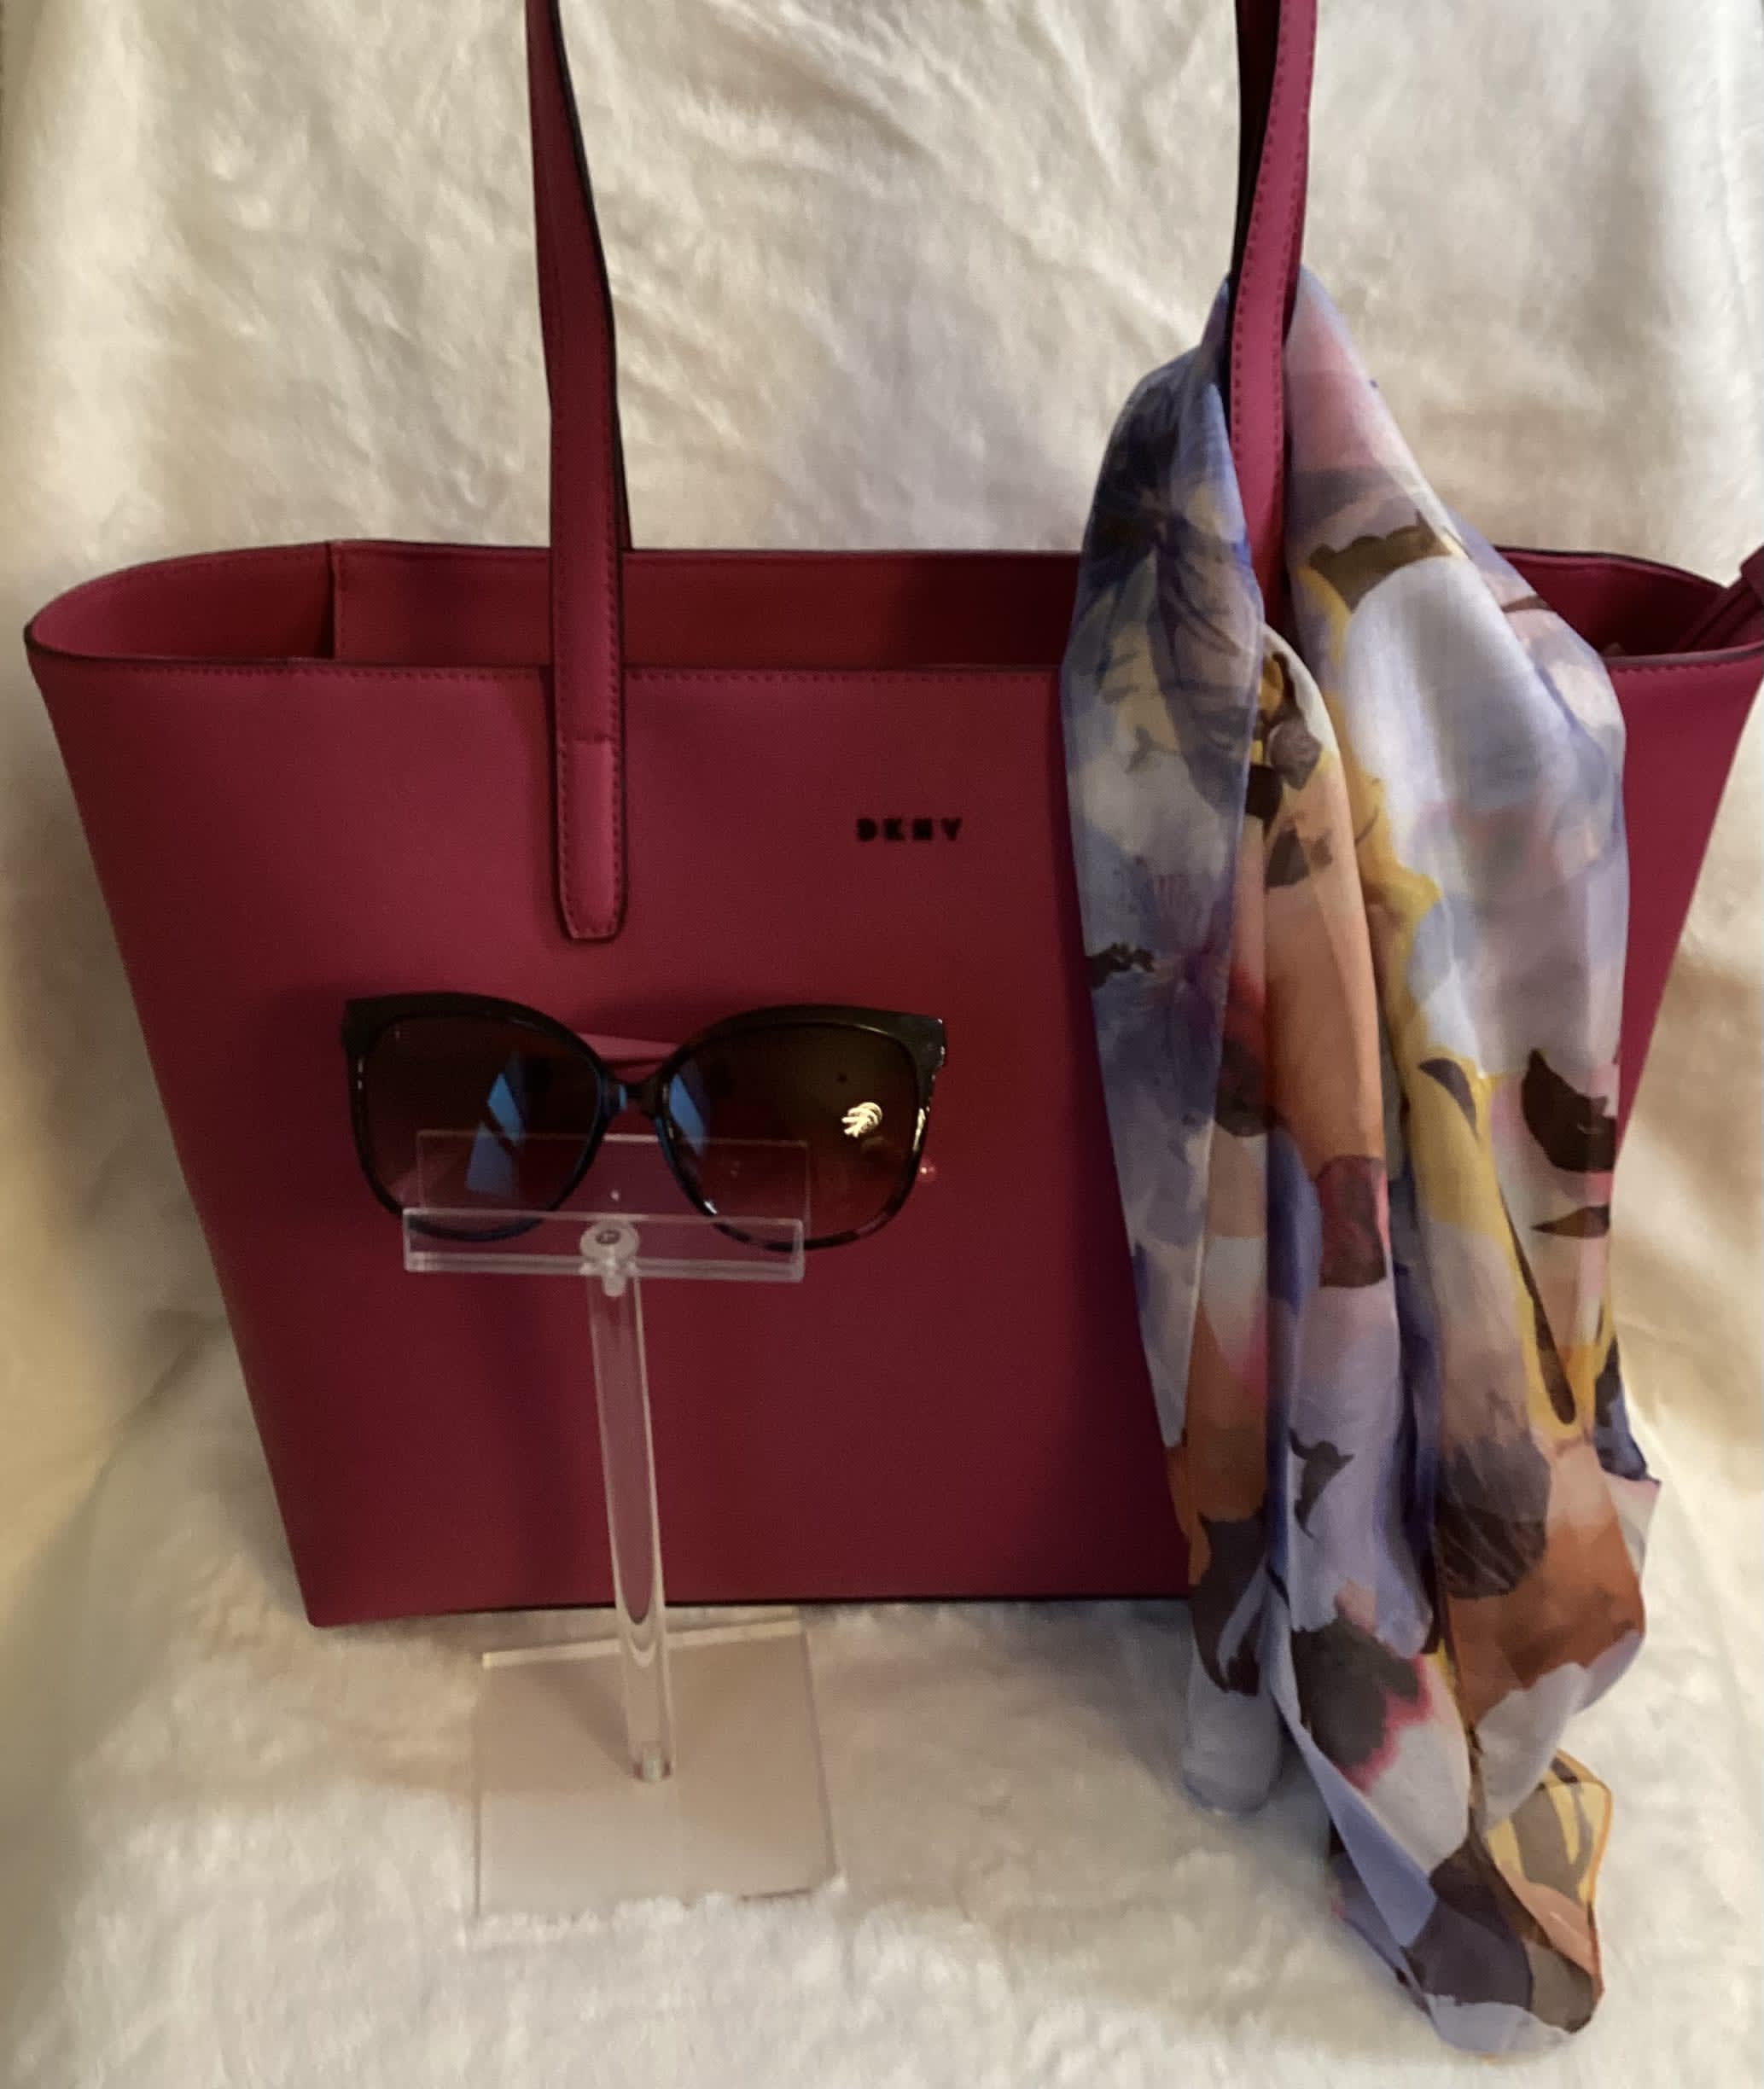 Hot Pink DKNY Hobo Bag with Scarf and Sunglasses - Handbag with sunglasses  and scarf - Sophistication by Me'lange